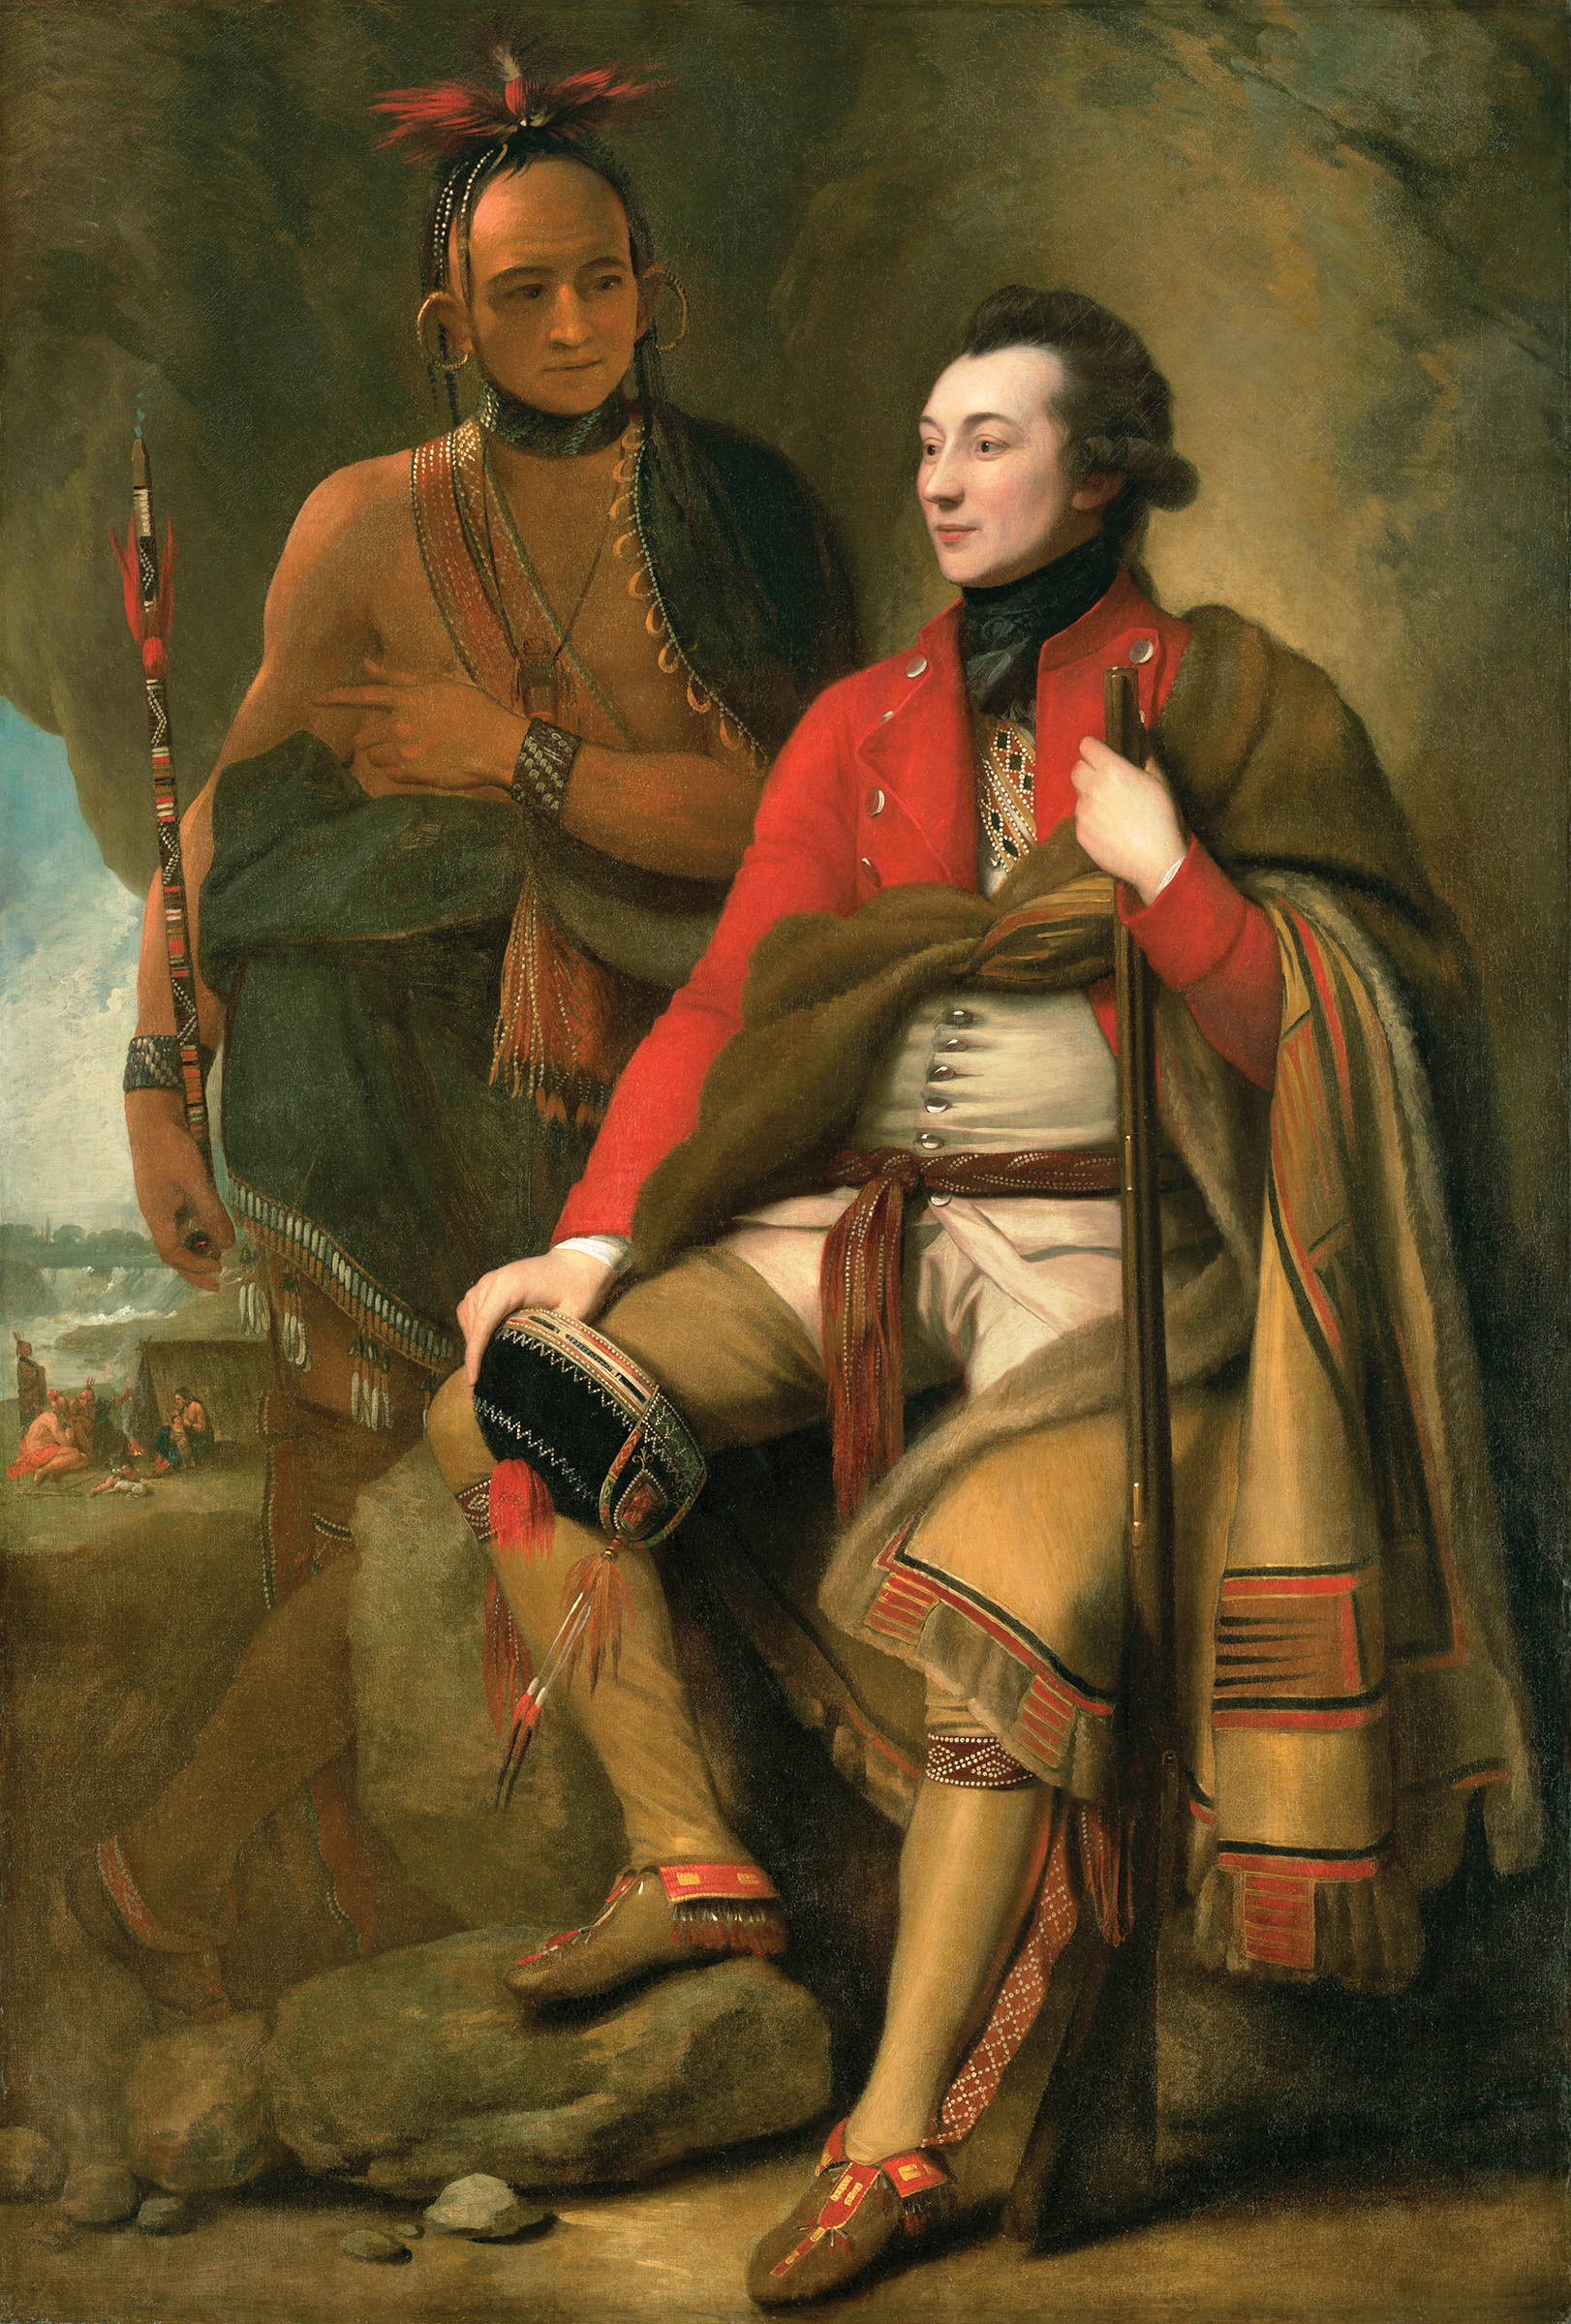 Benjamin West’s painting may depict Sir William Johnson or his nephew Guy Johnson; both worked to retain the Six Nation Confederacy’s allegiance to the crown. William Johnson served as the British Superintendent of Indian Affairs for the Northern District until his death in 1774, at which time Guy Johnson took the post. 